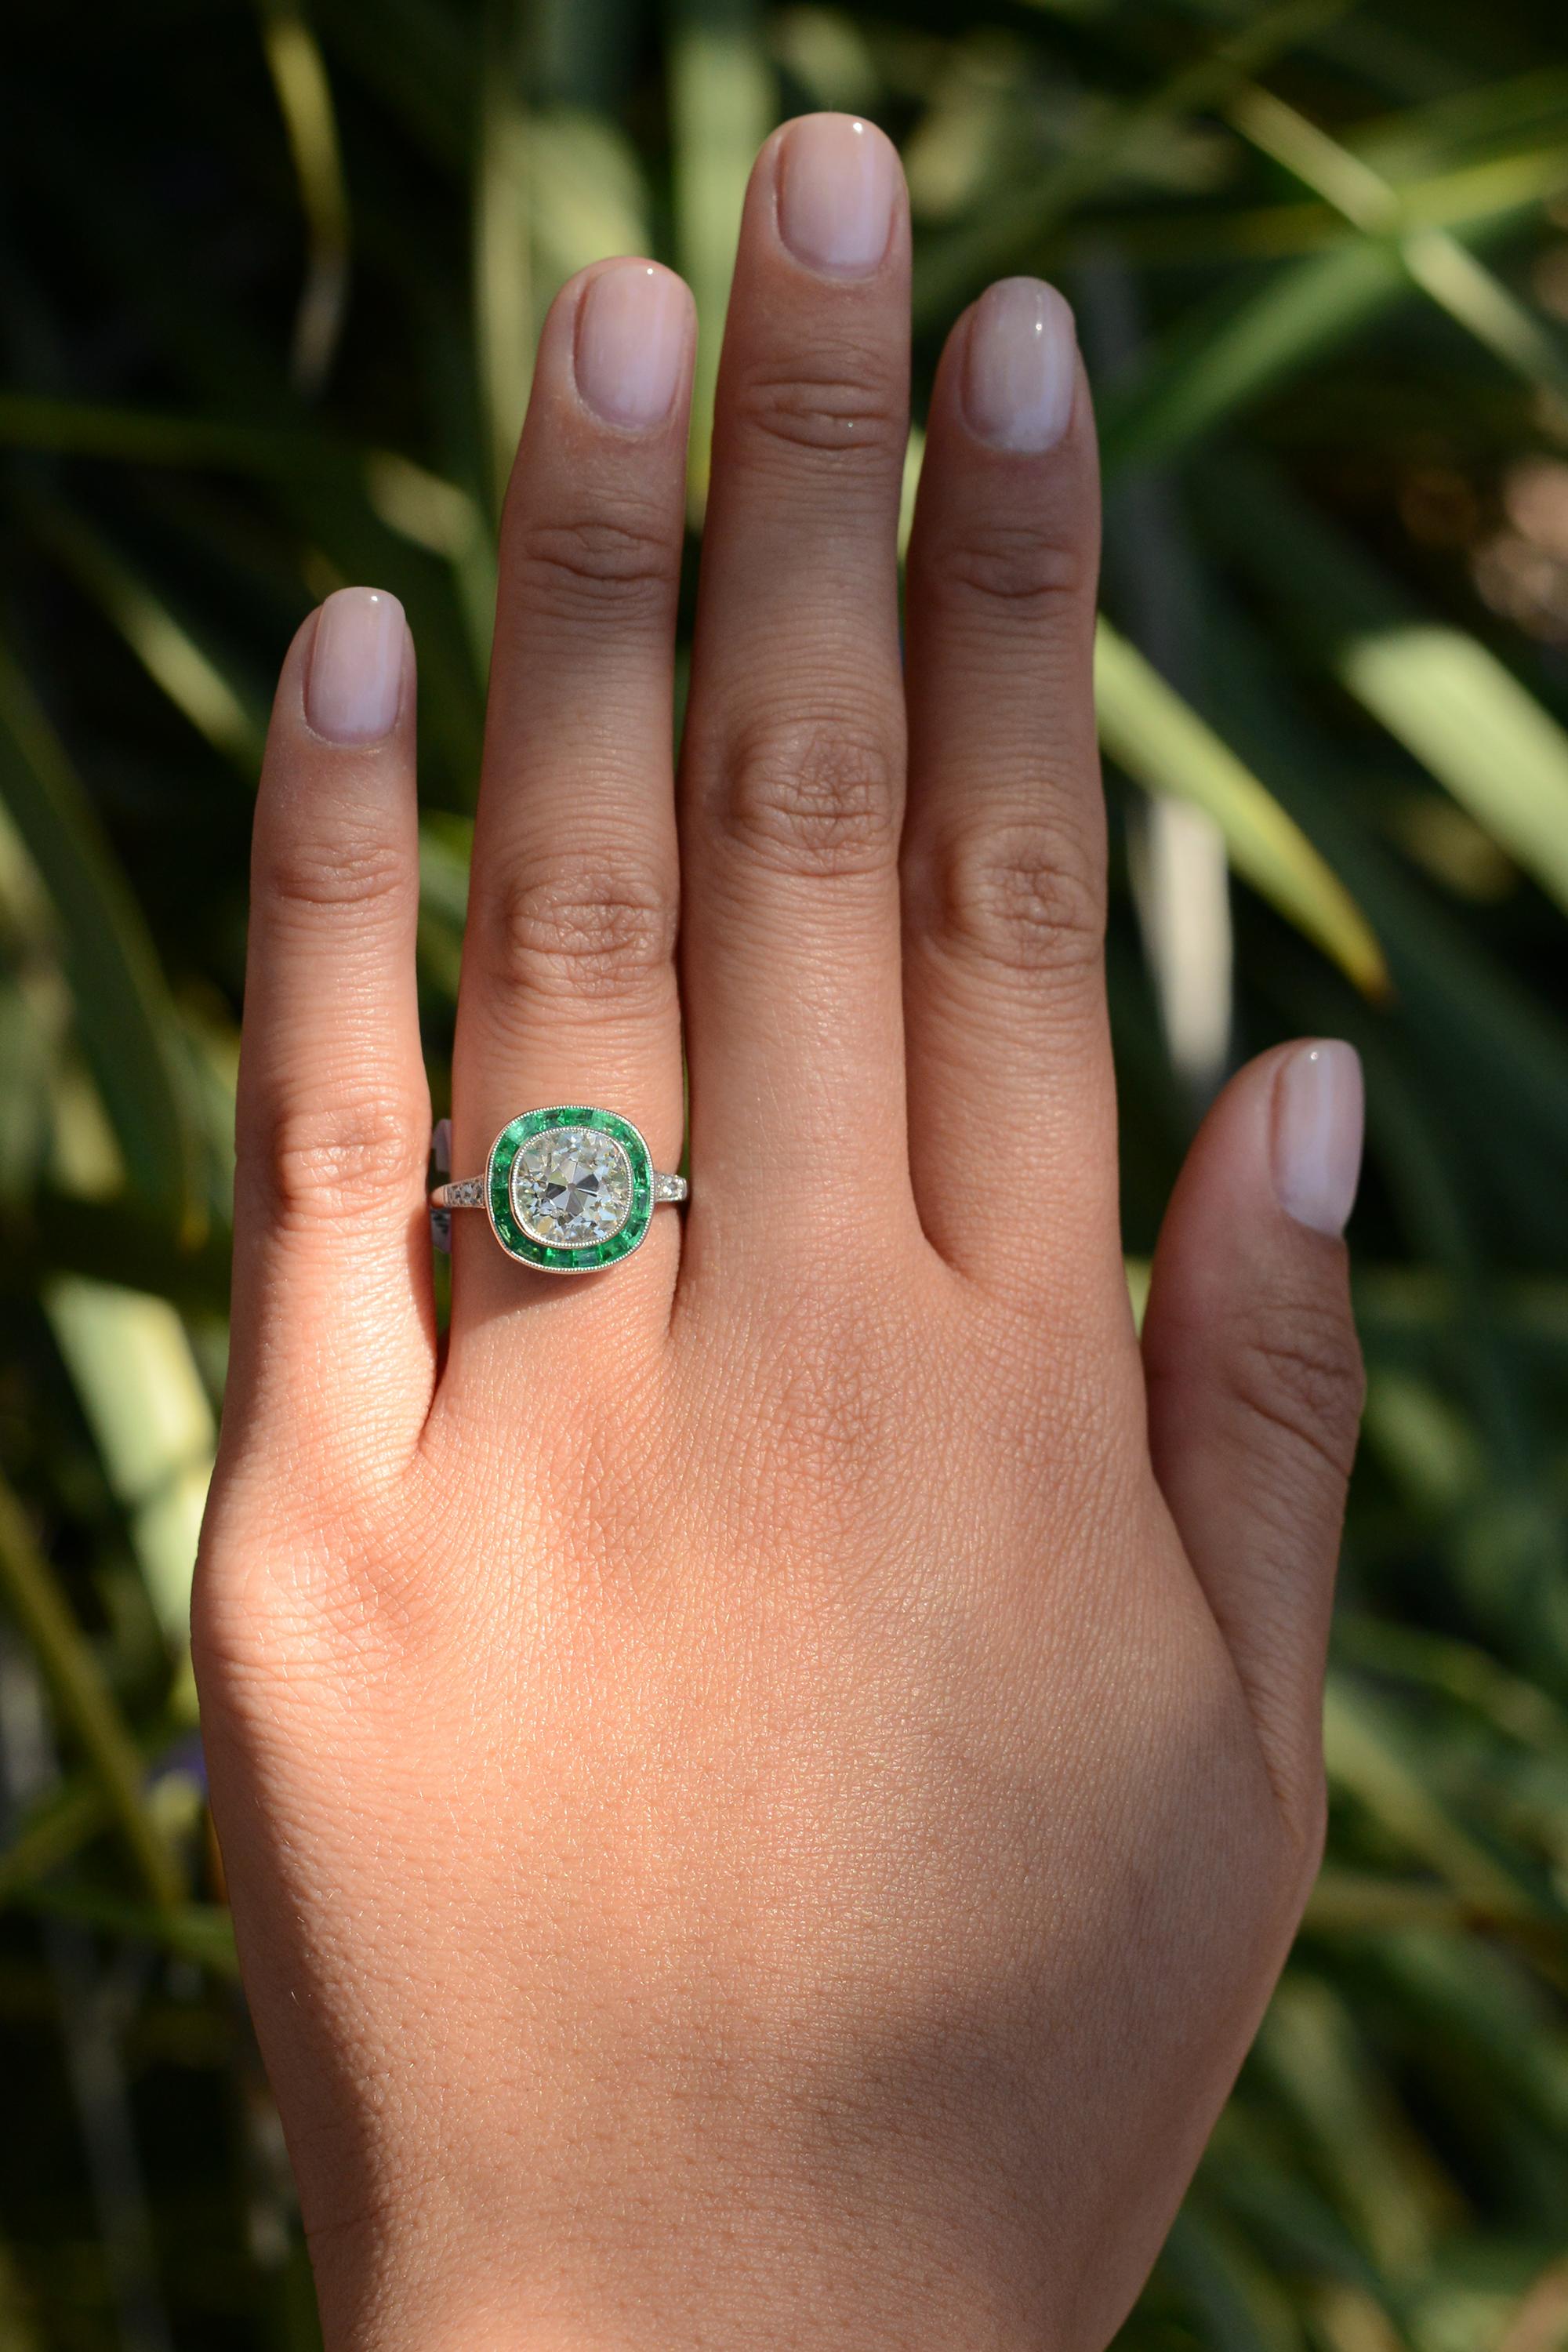 This dreamy engagement ring combines a charismatic, antique cushion diamond with a simple, yet unique emerald halo. The near 3 carat antique diamond has all the personality we love in an old mine cut diamond with remarkable sparkle and impeccable